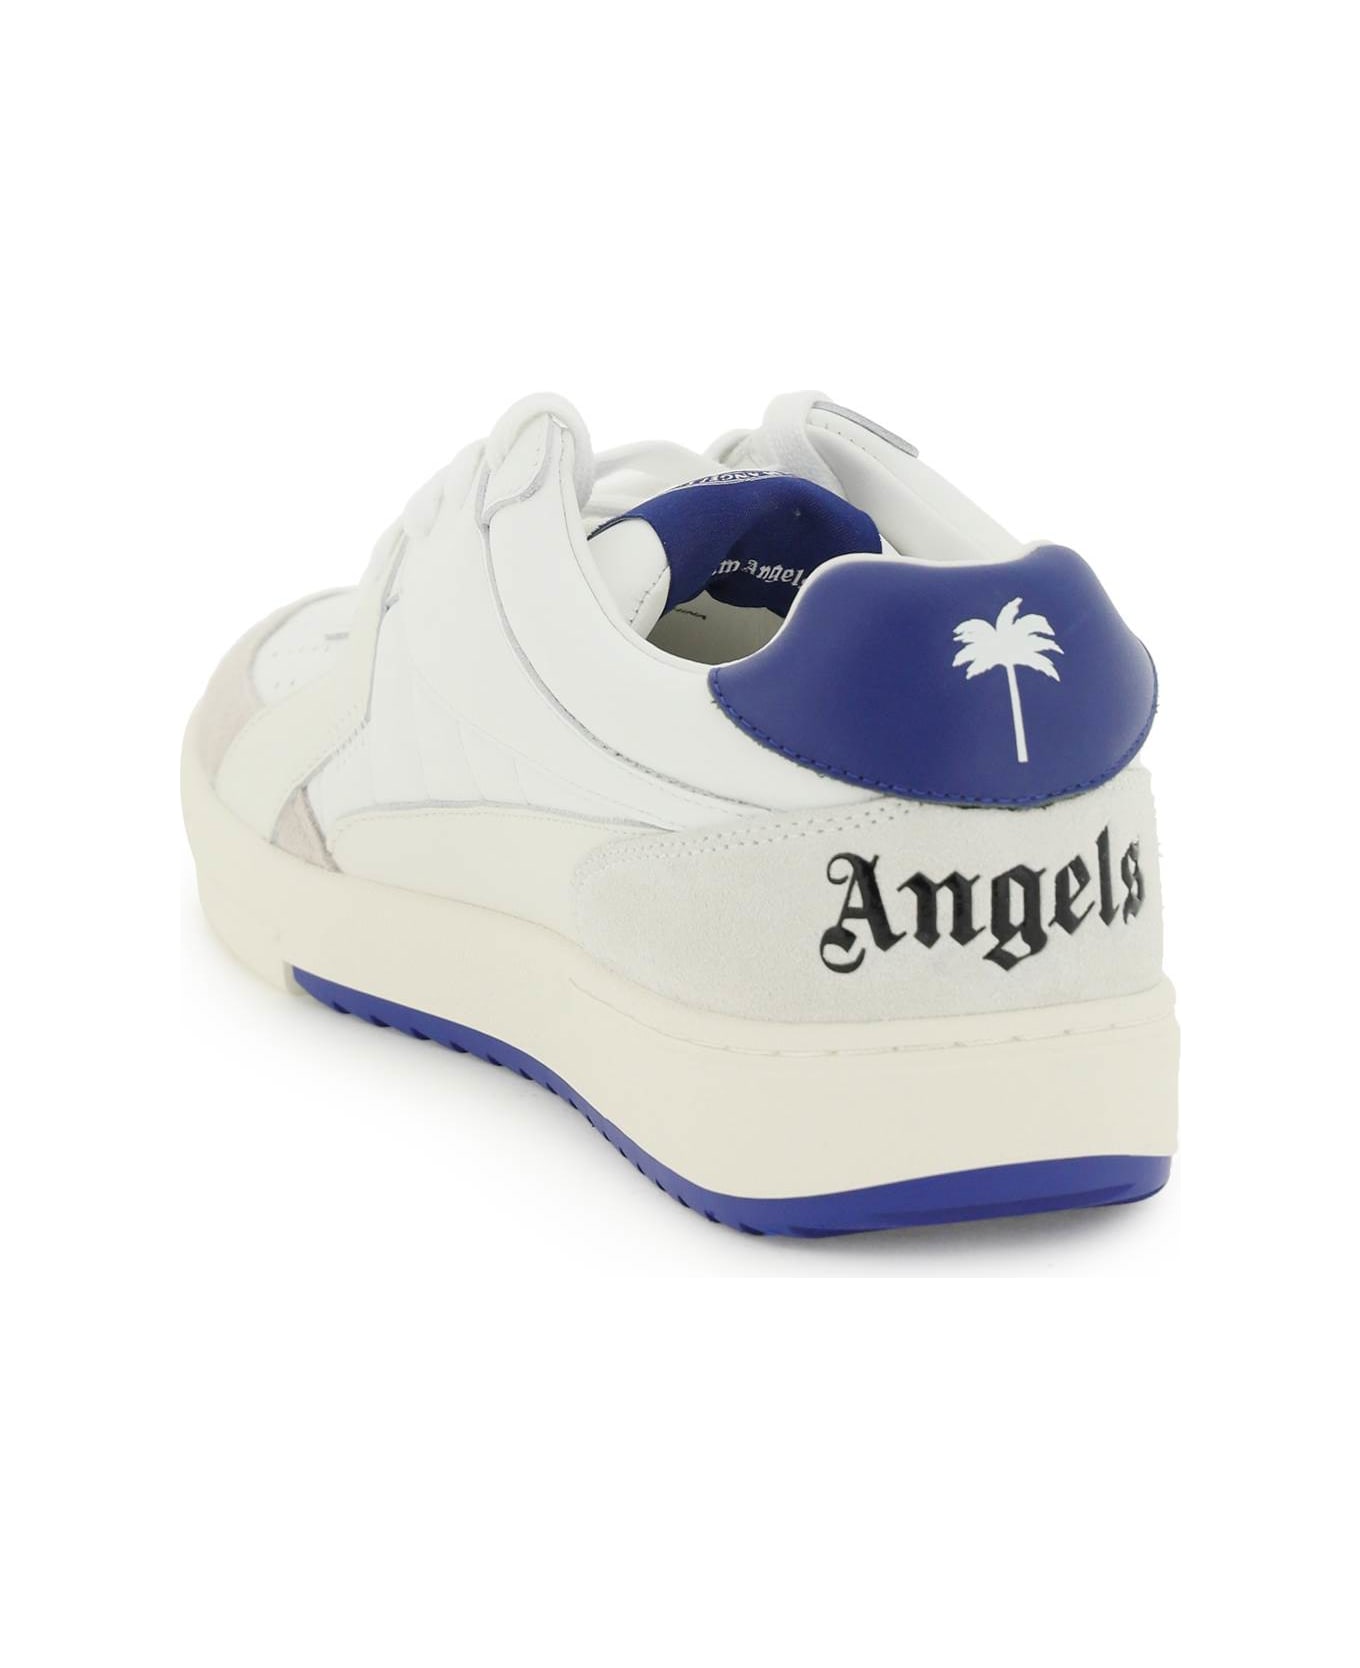 Palm Angels Palm University Sneakers - WHITE BLUE (White) スニーカー